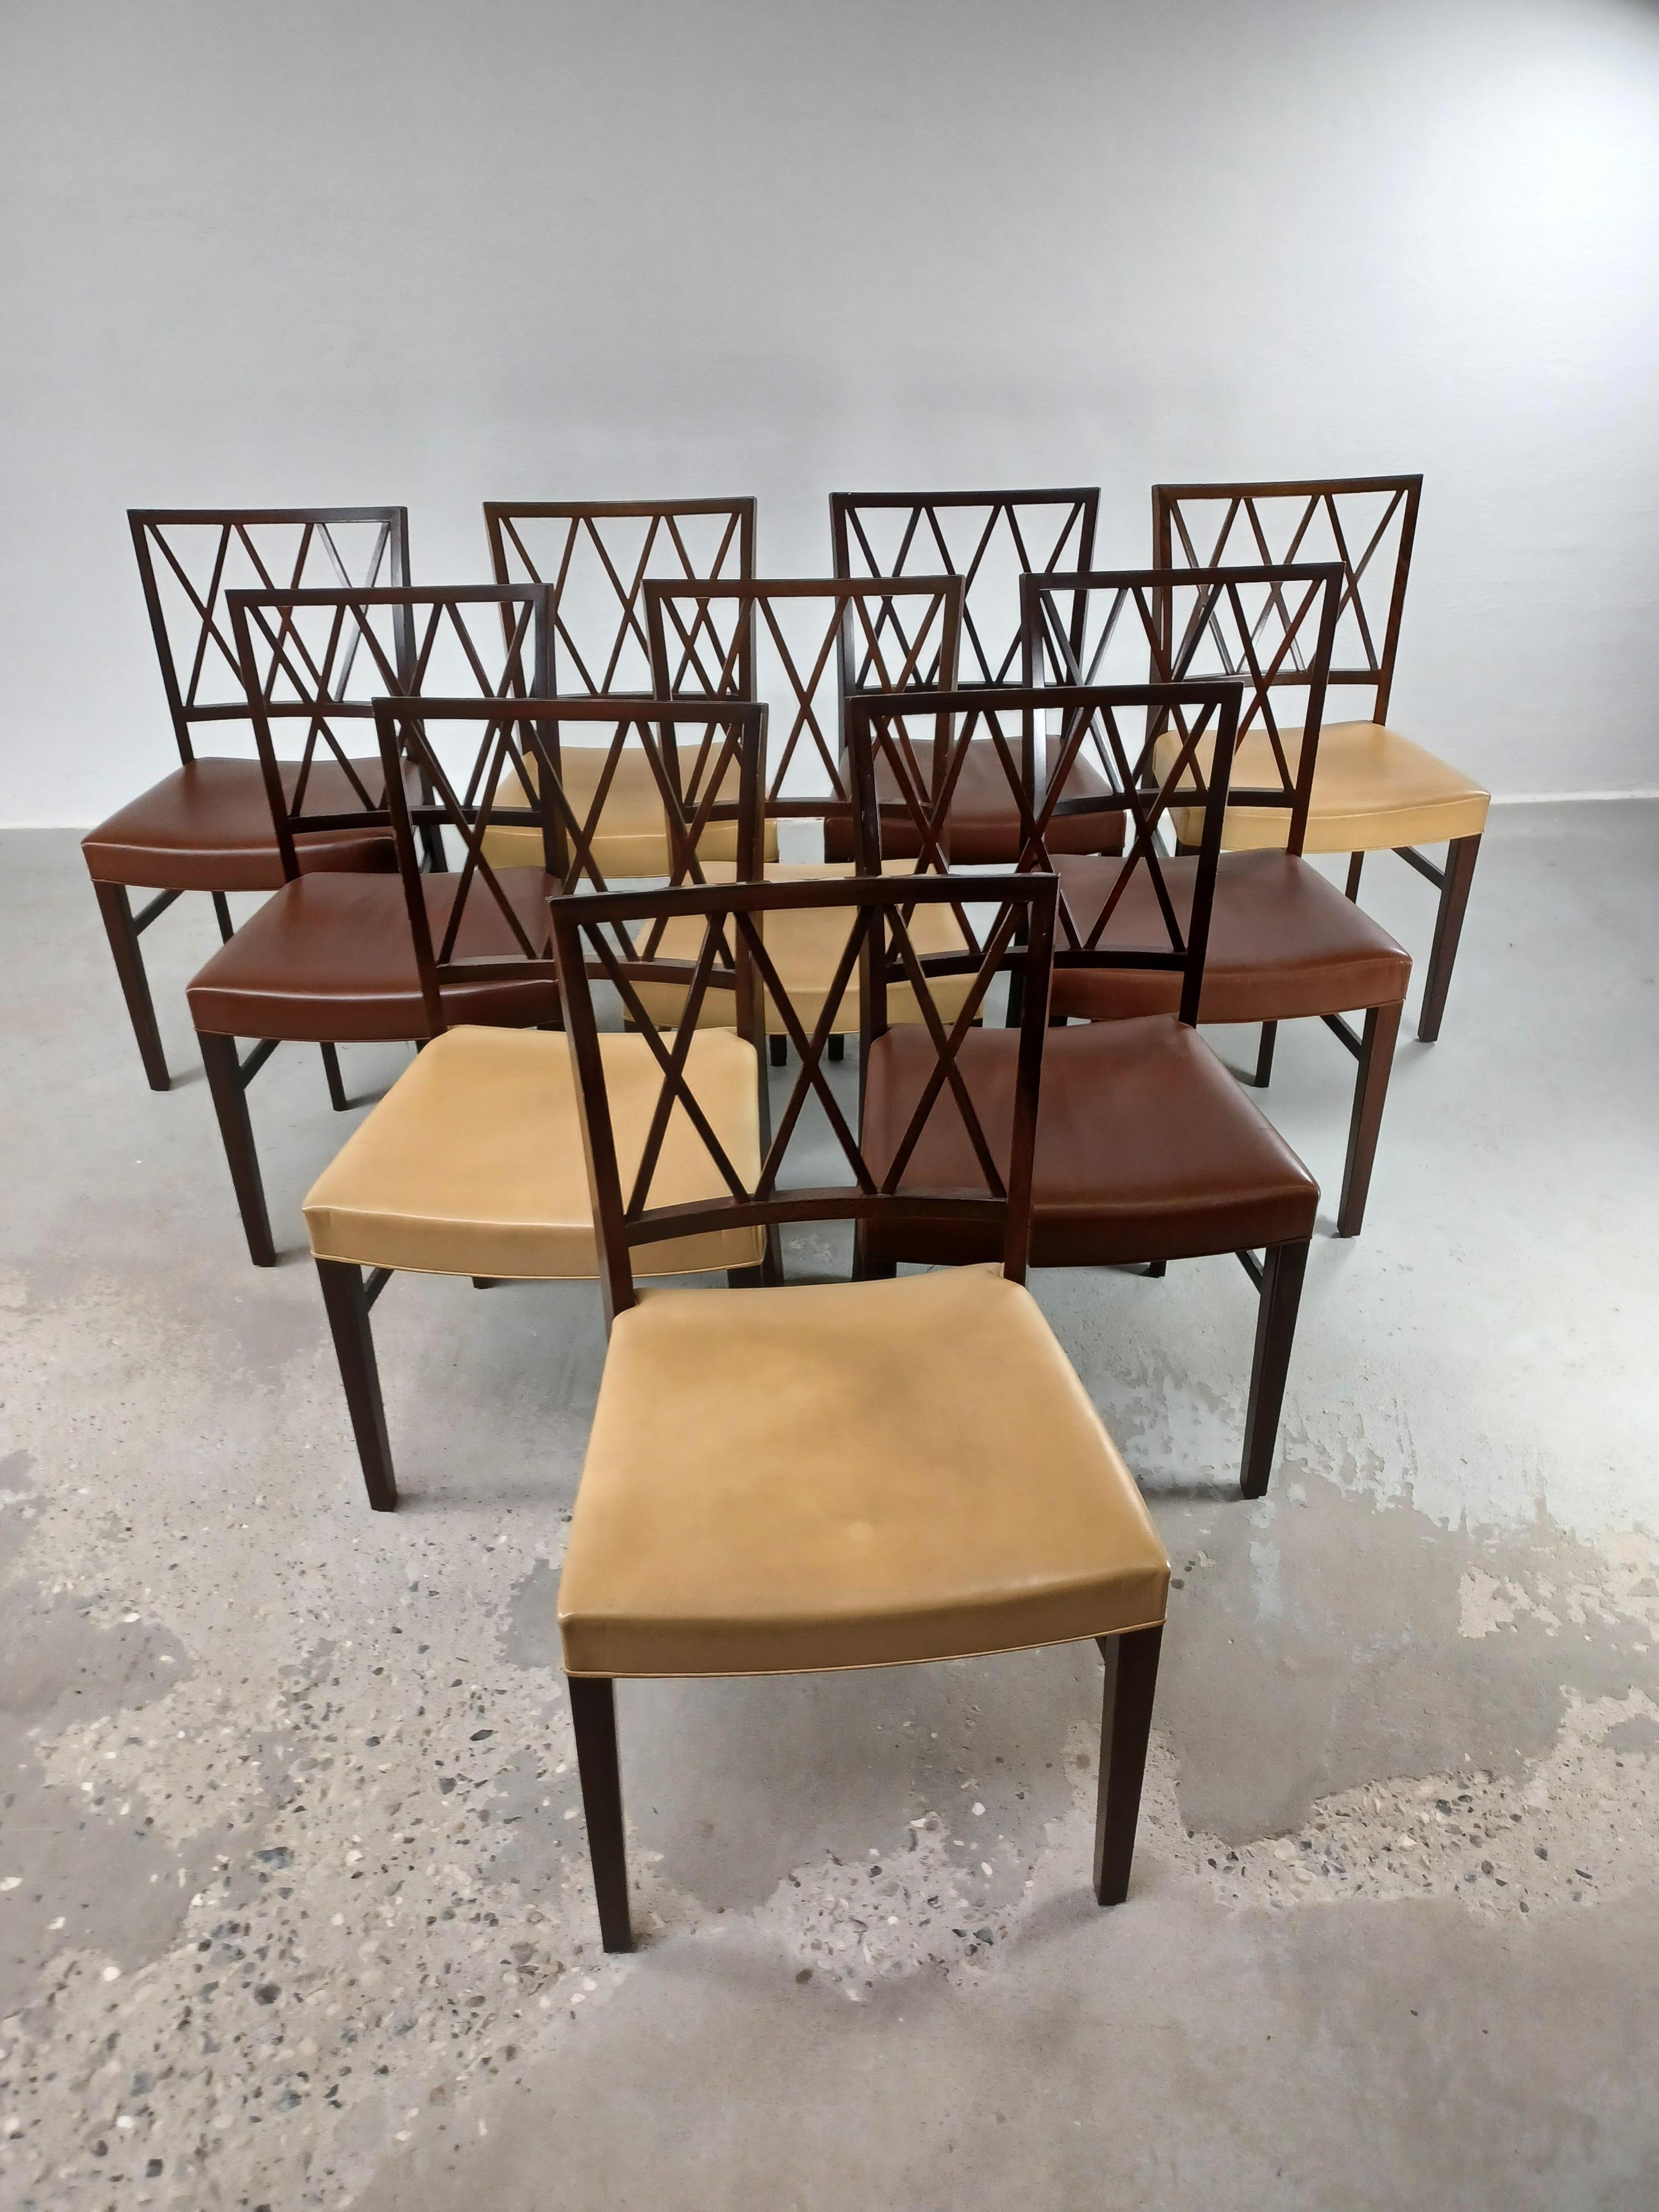 Set of ten fully restored Danish Ole Wanscher dining chairs custom reupholstery included.

The chairs with their solid yet at the same time light and elegant lines and small details feature Ole Wanschers deep sense of style, design and craftmanship